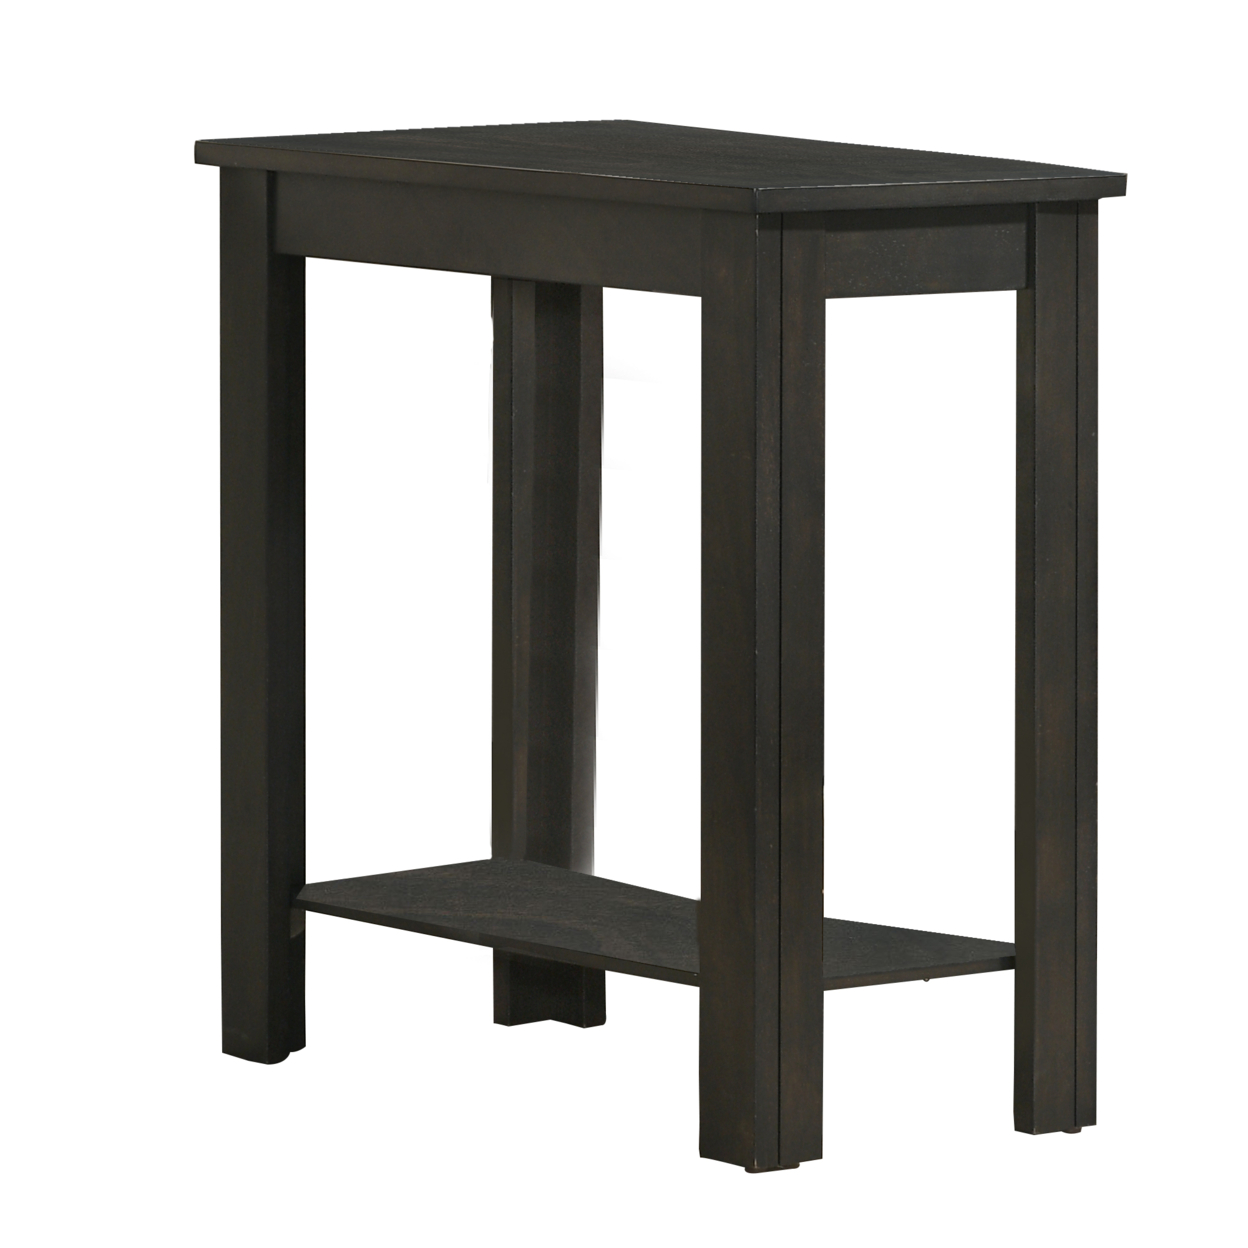 Wooden Side Table With Open Shelf And Straight Legs, Espresso Brown- Saltoro Sherpi